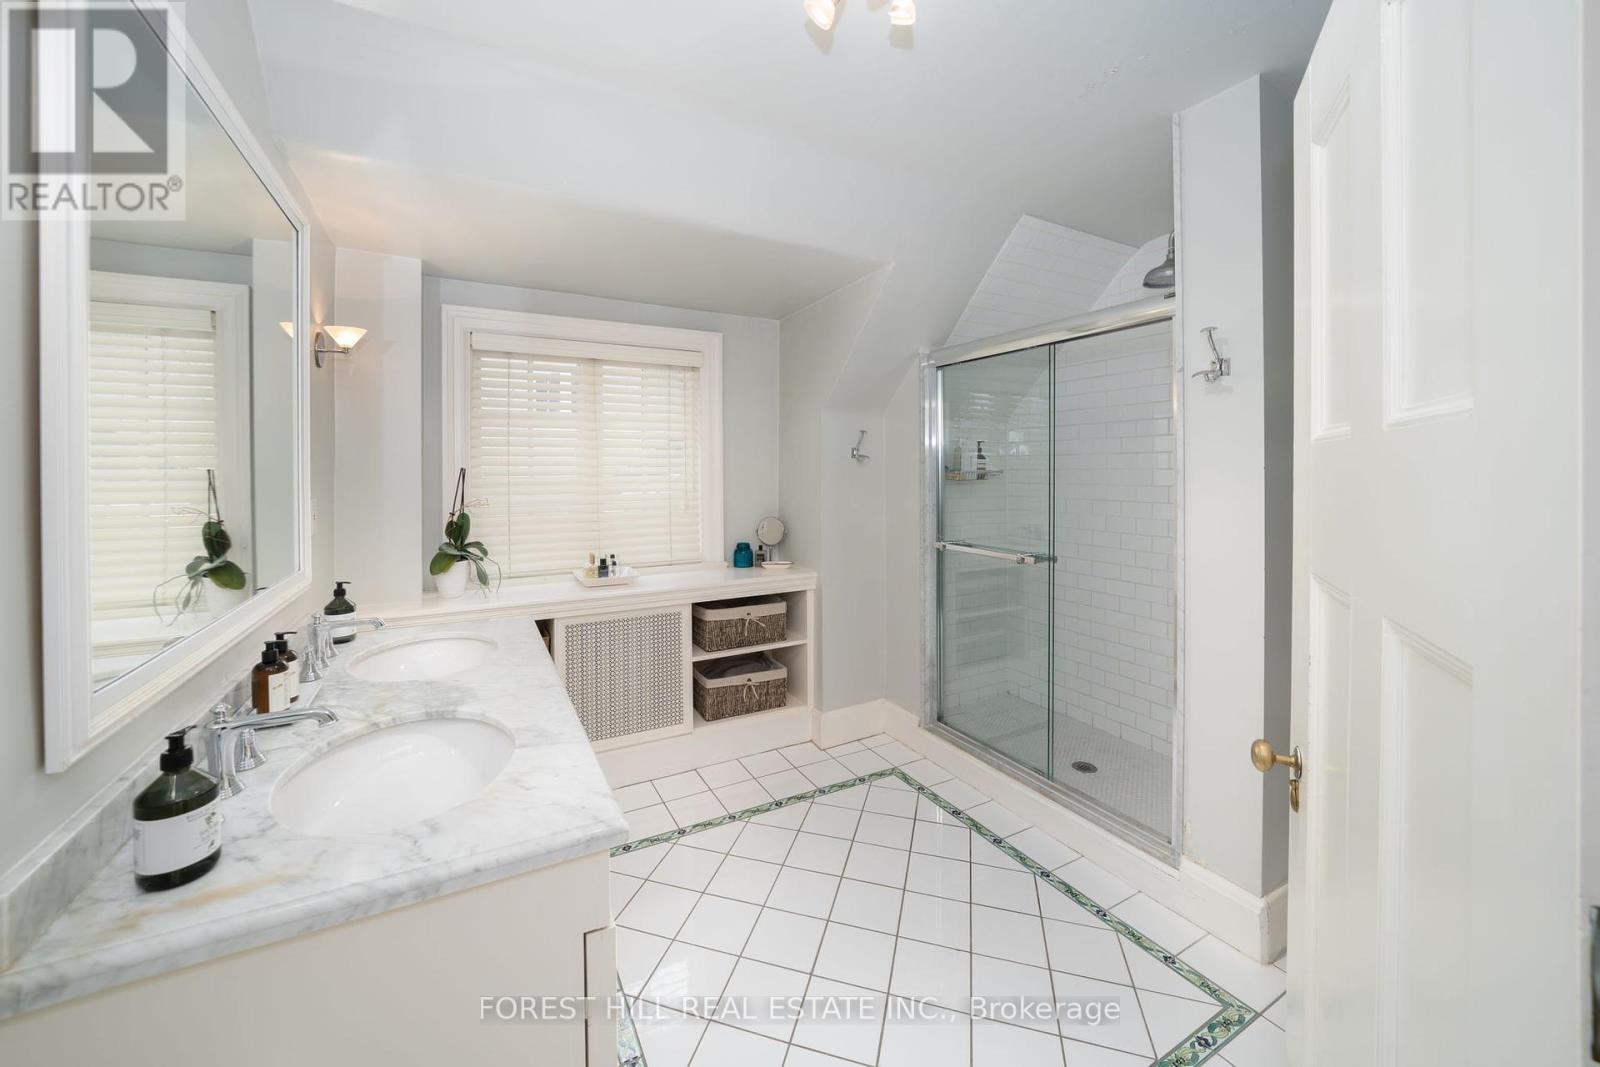 77 Forest Hill Rd, Toronto, Ontario  M4V 2L6 - Photo 23 - C8199472